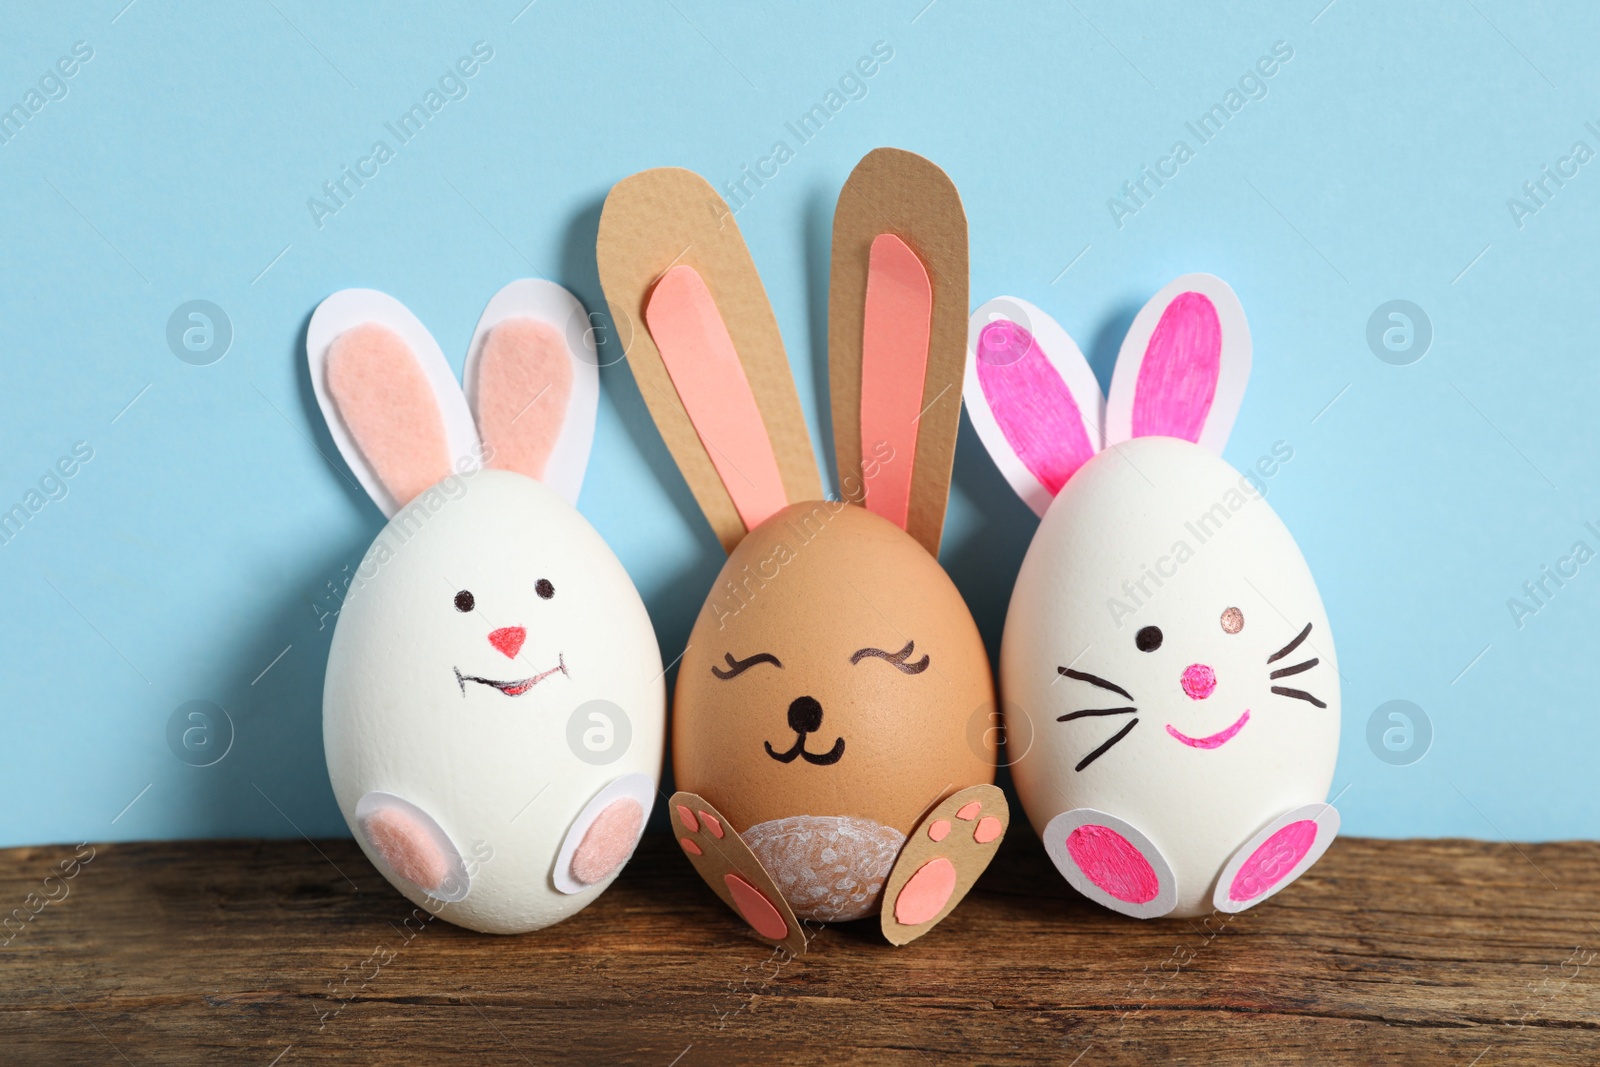 Photo of Eggs as cute bunnies on wooden table against light blue background. Easter celebration